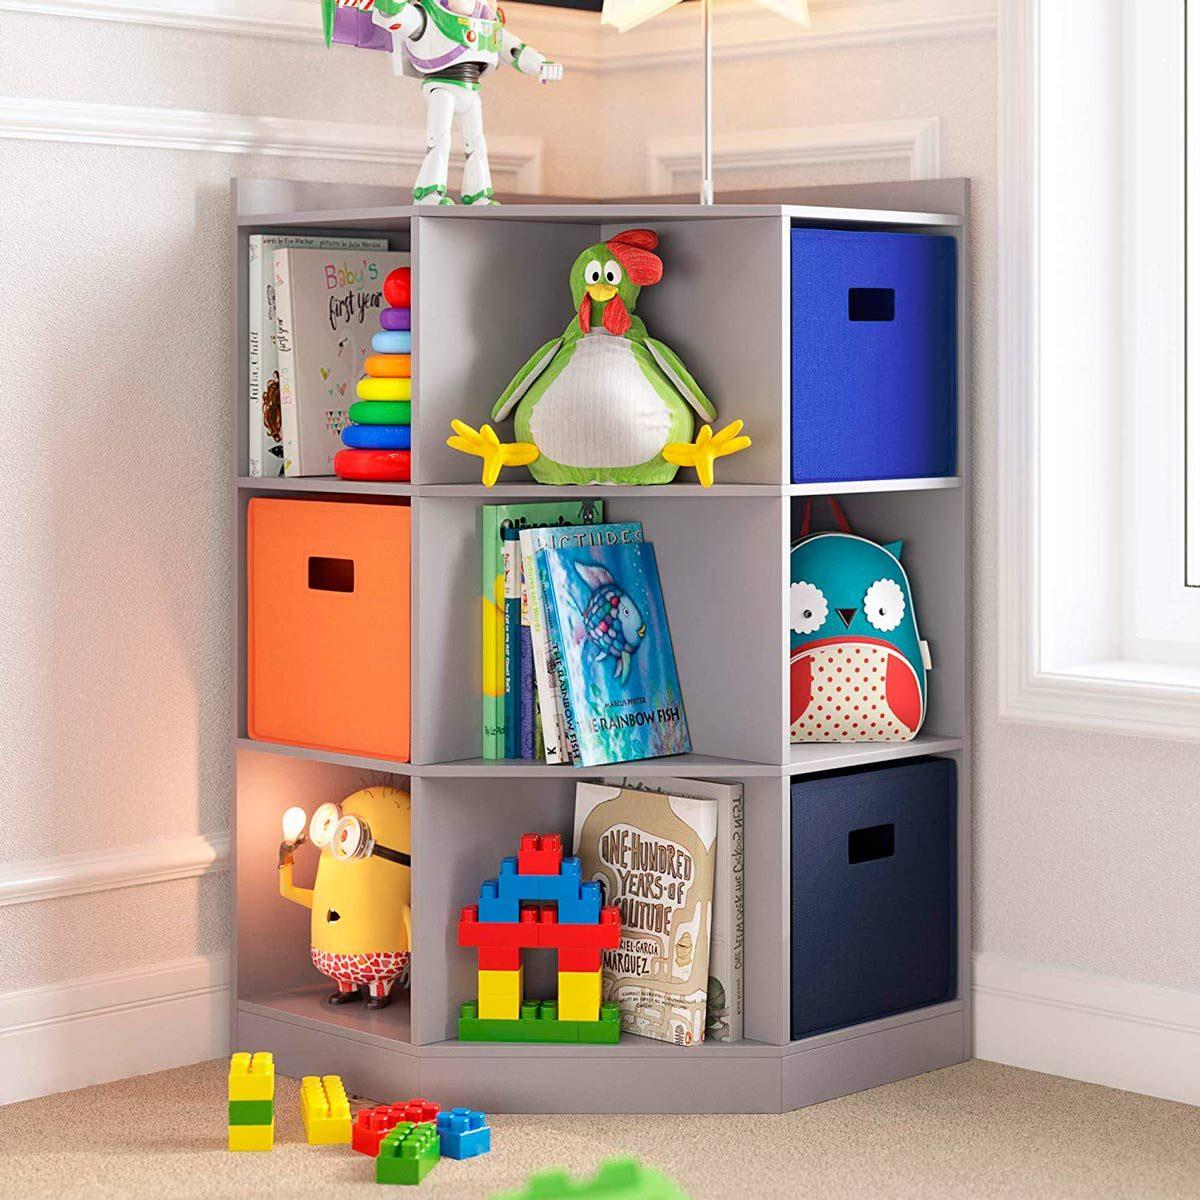 10 Kids Bedroom Storage Ideas for Small Rooms